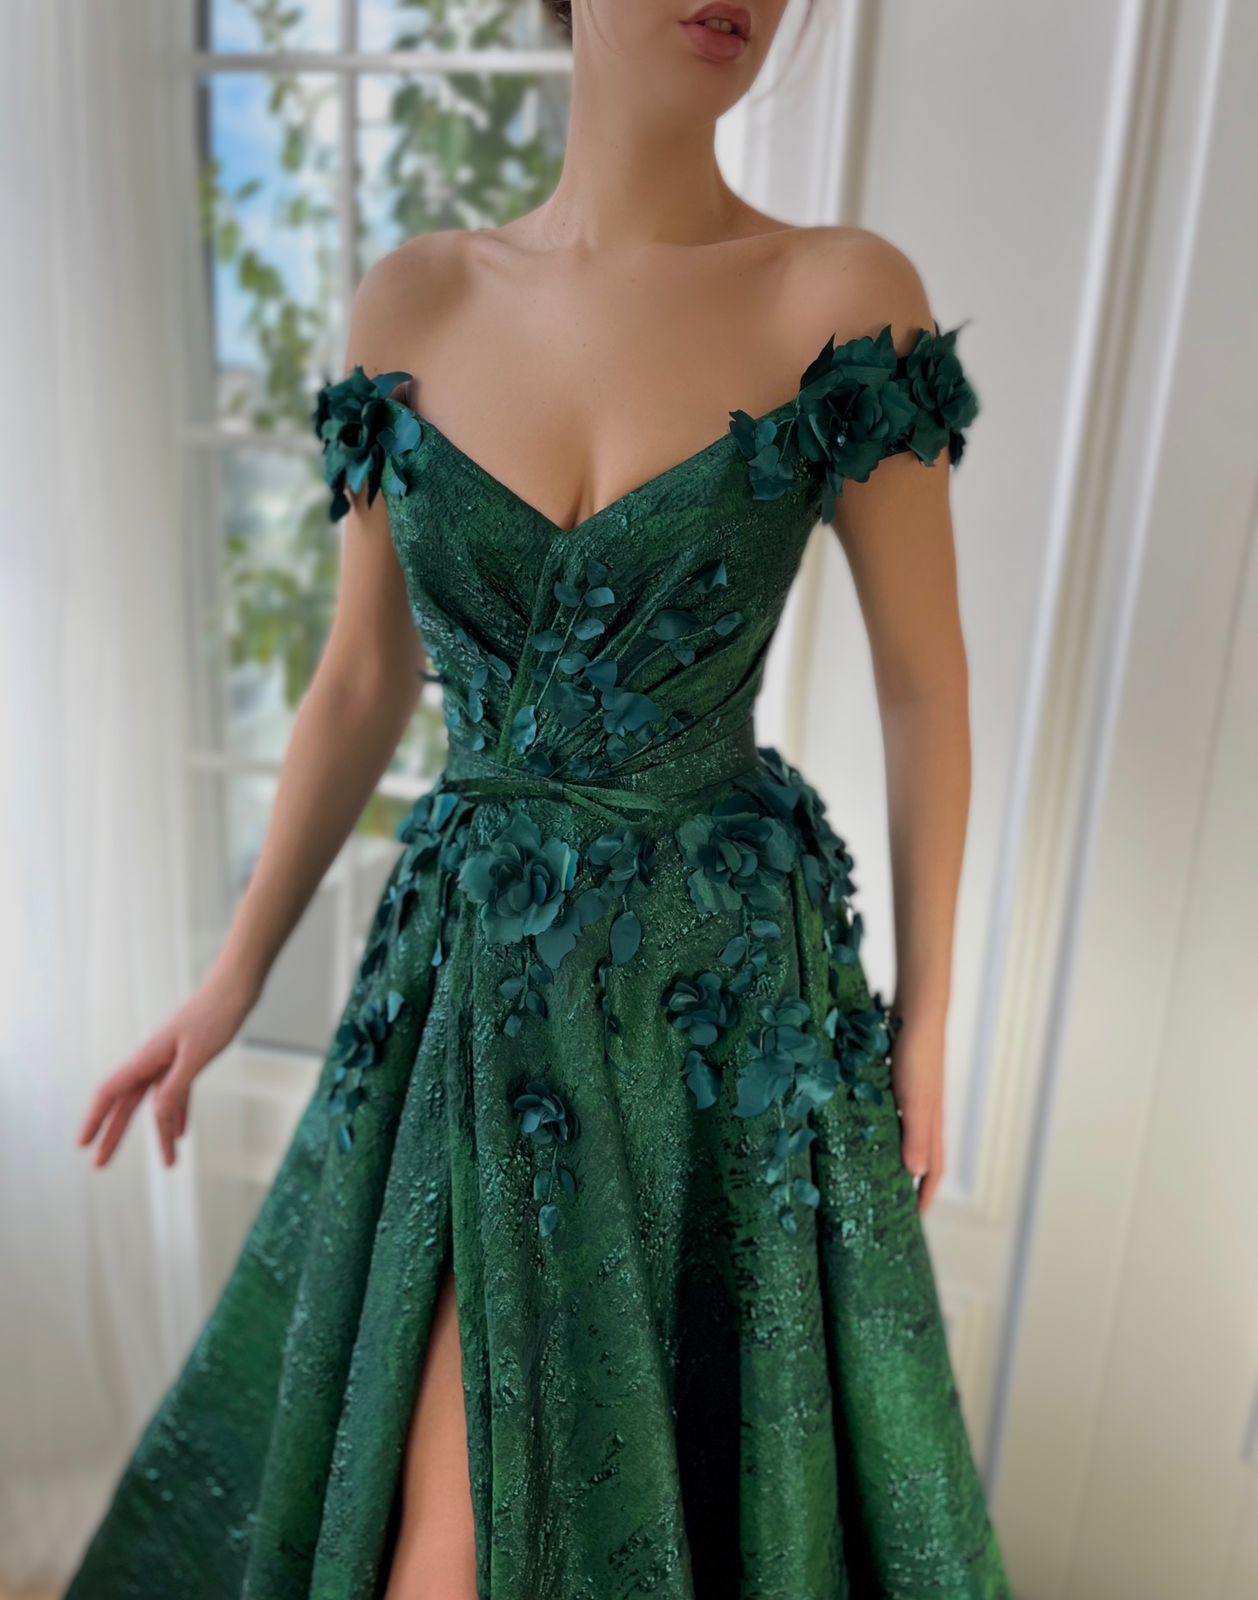 Green A-Line dress with off the shoulder sleeves, flowers and embroidery